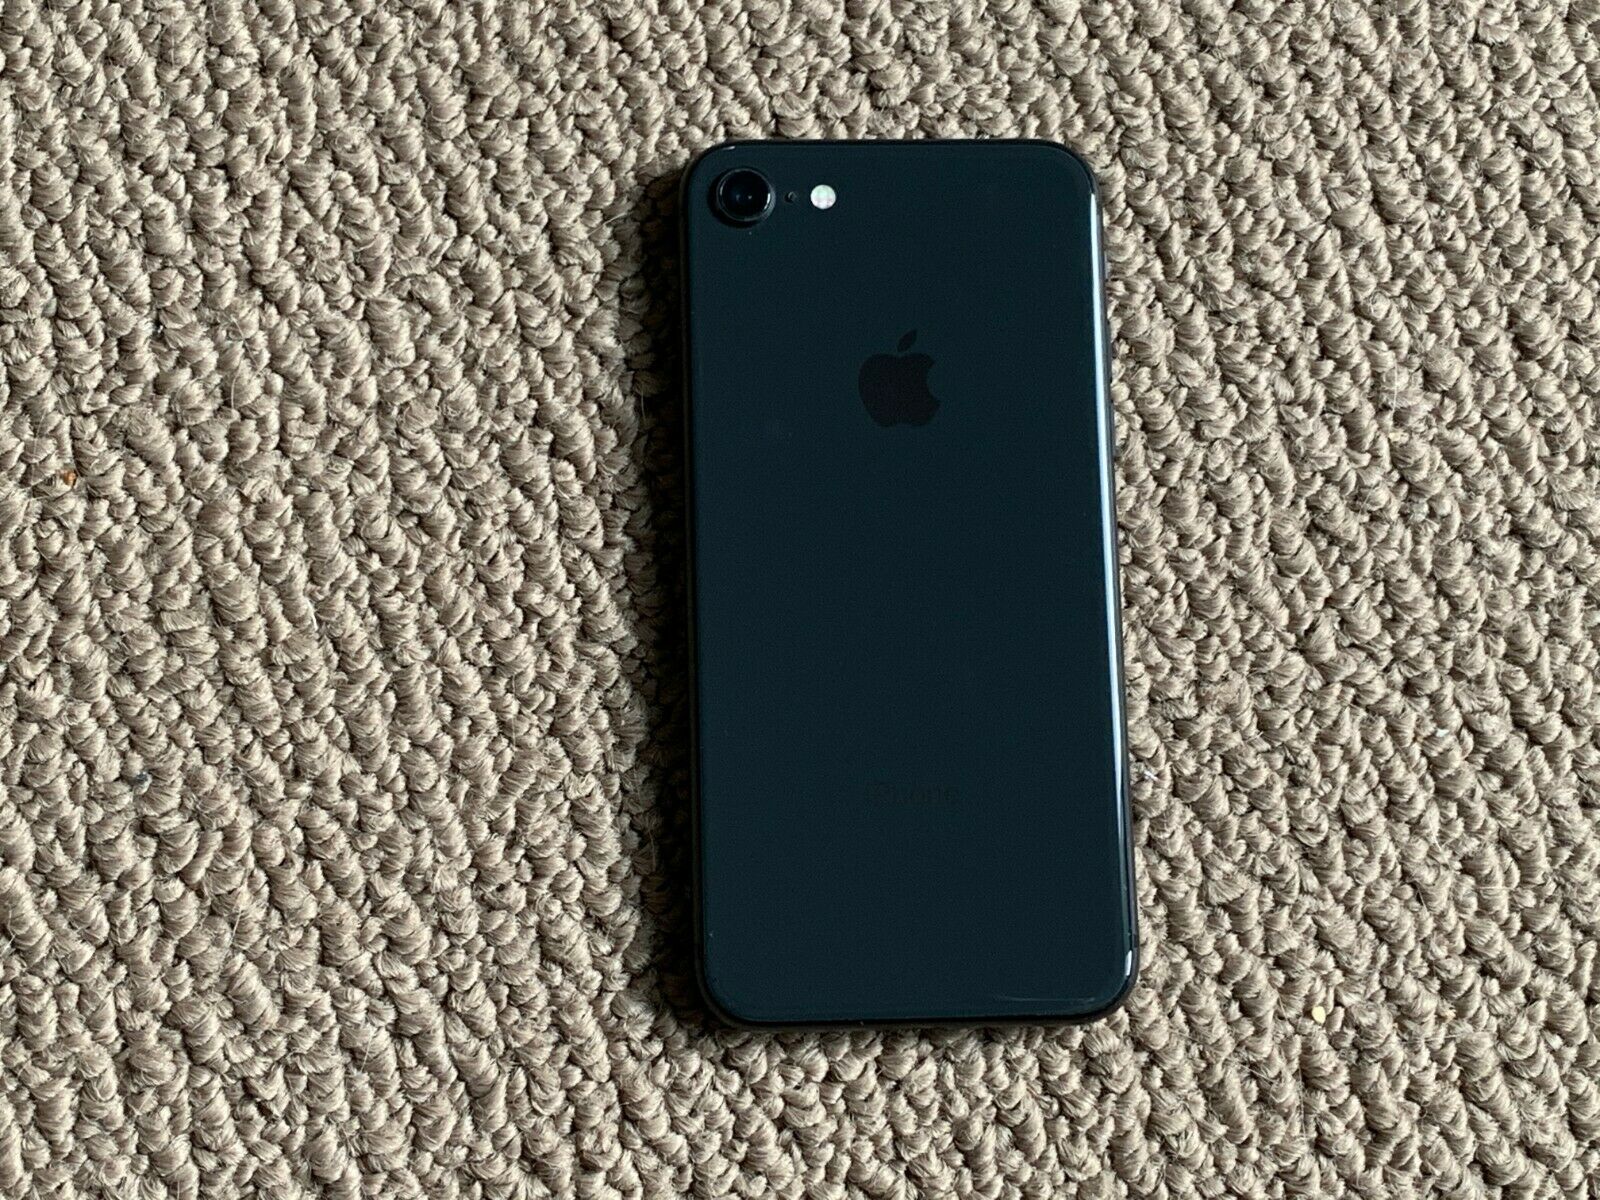 APPLE IPHONE 8 256GB UNLOCKED SMARTPHONE-BLK  Refurbished with Charger - Atlas Computers & Electronics 